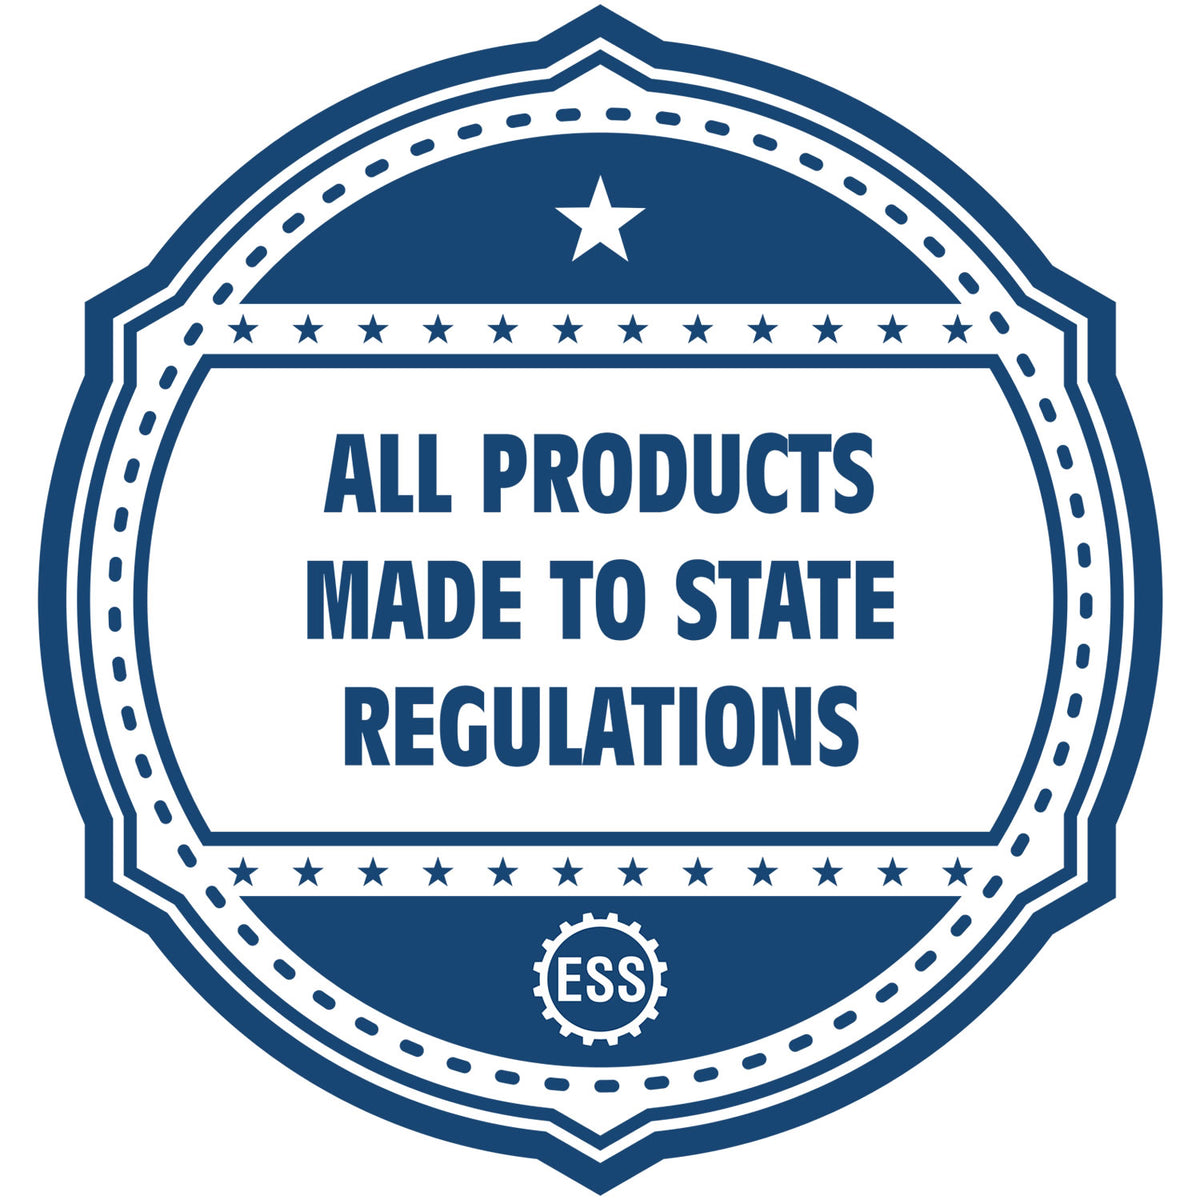 An icon or badge element for the Super Slim Florida Notary Public Stamp showing that this product is made in compliance with state regulations.